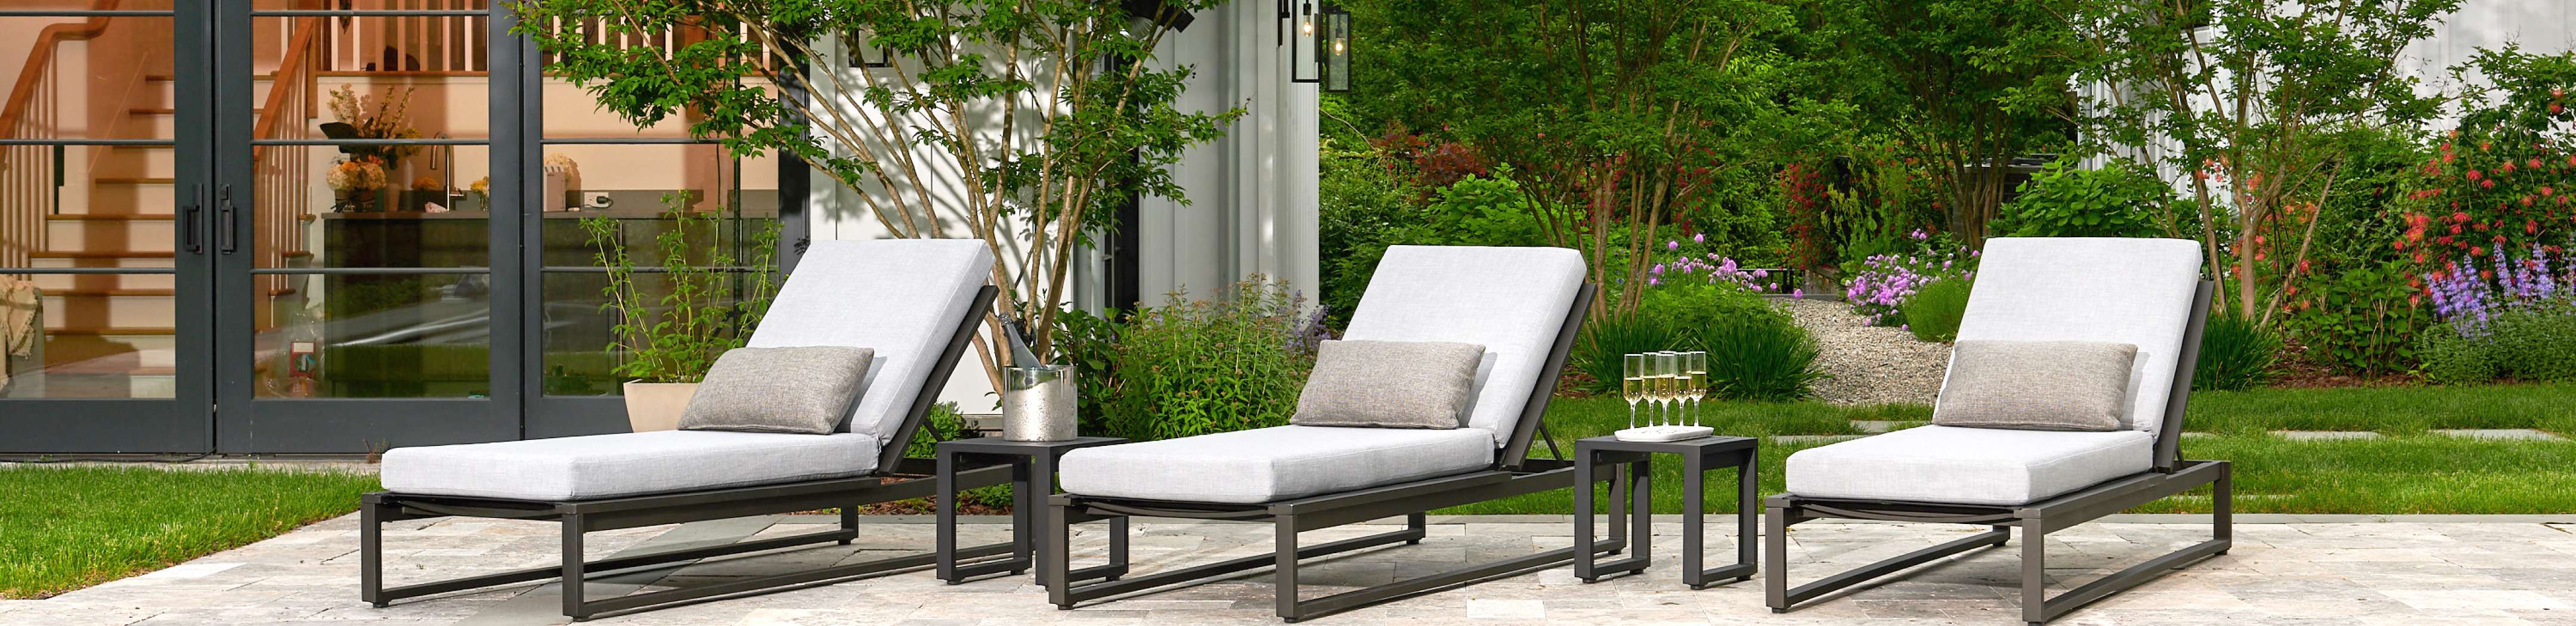 outdoor hospitality furniture